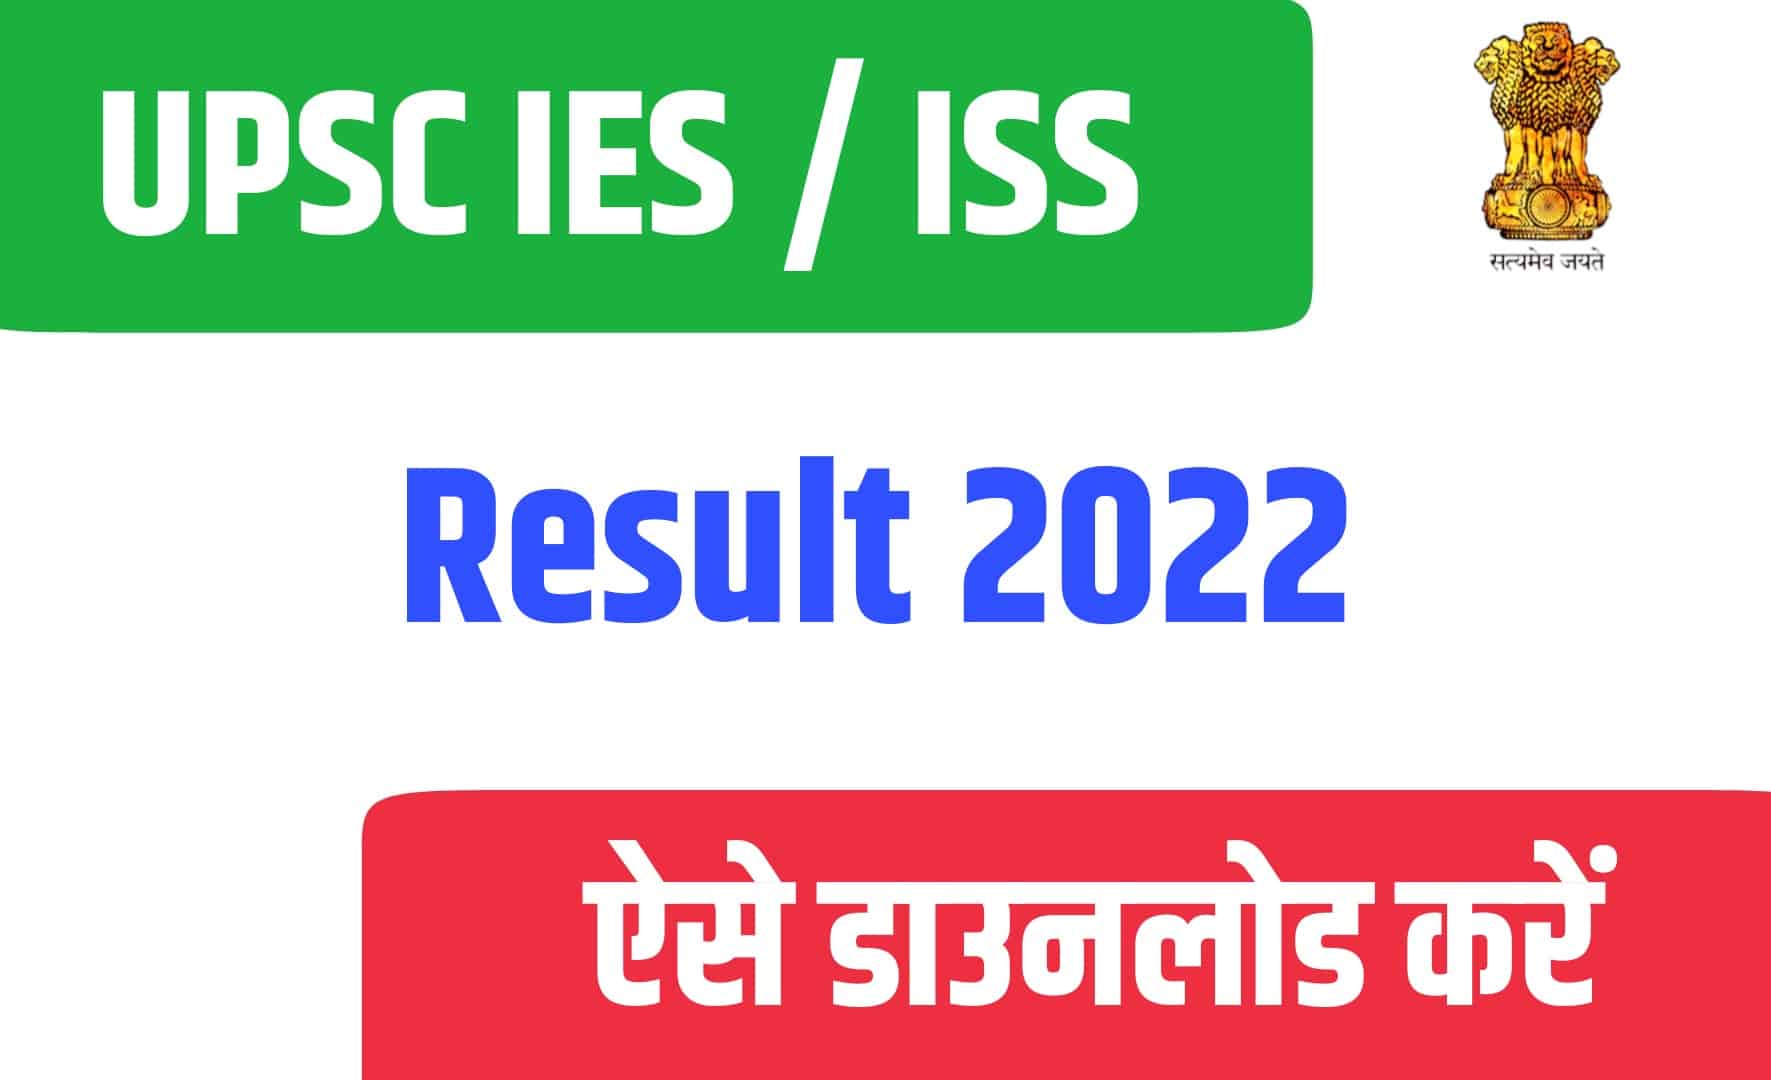 UPSC IES / ISS Result 2022